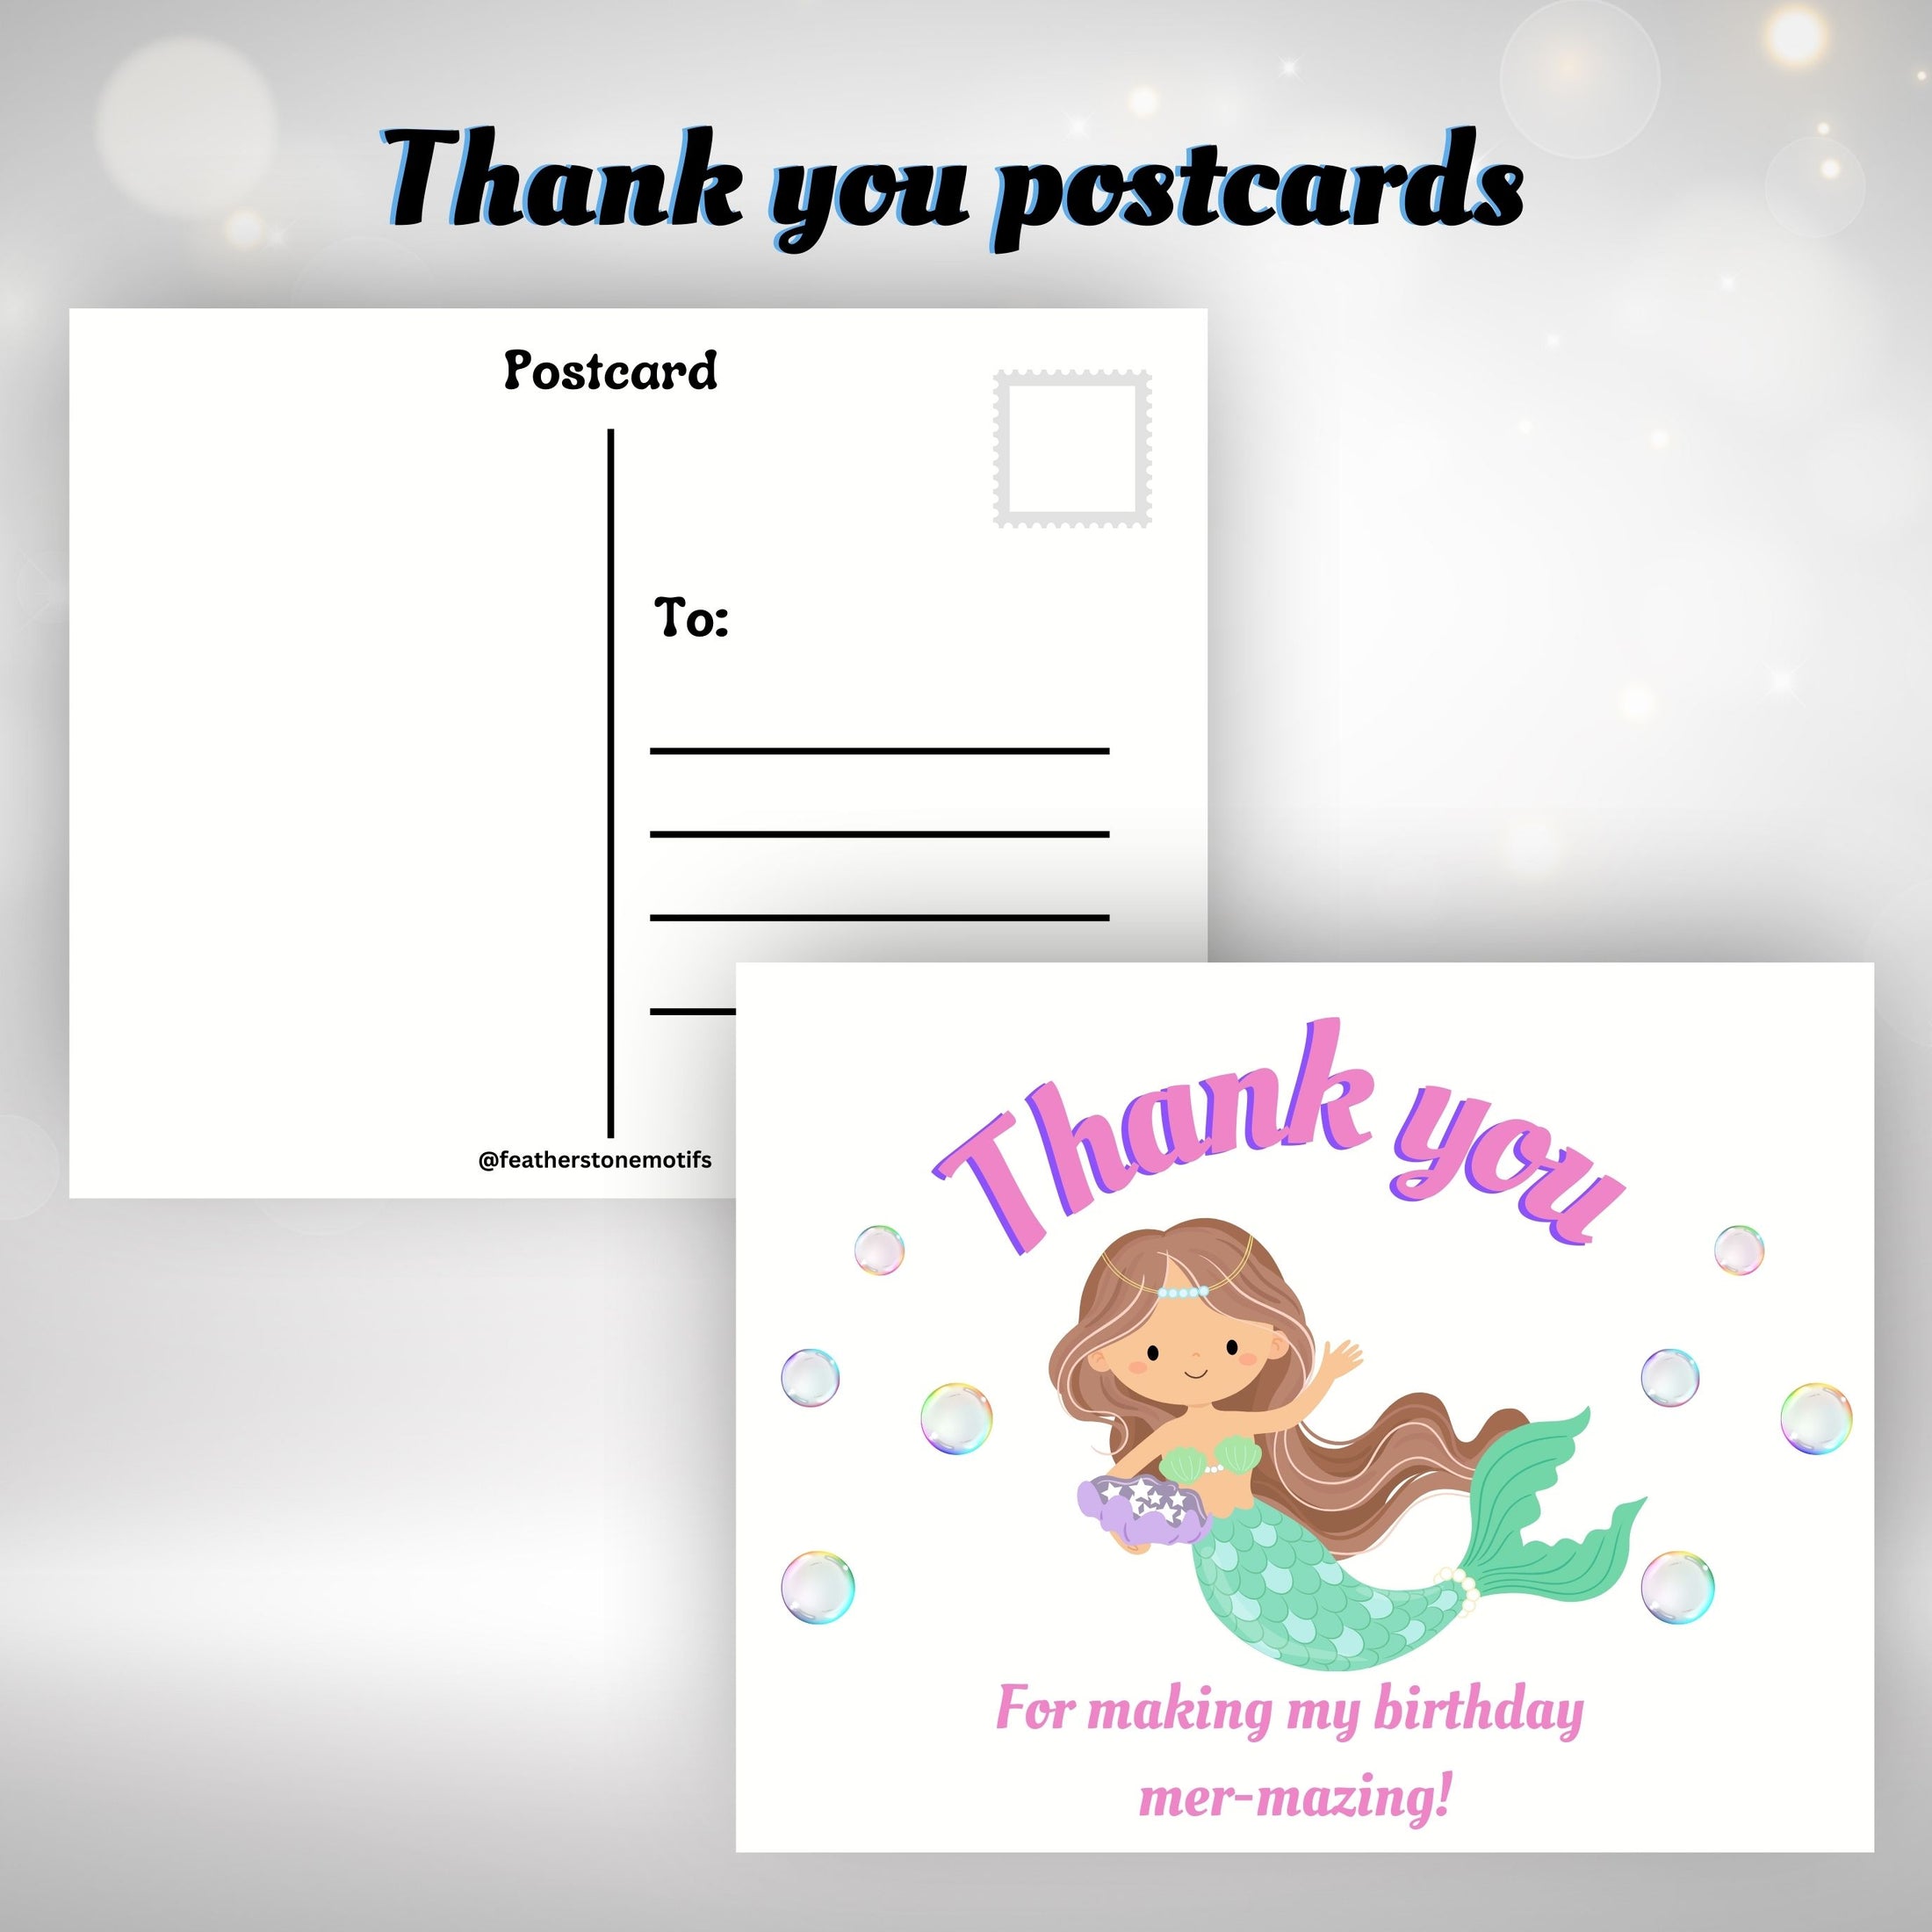 This image shows the front and back of the thank you postcards.